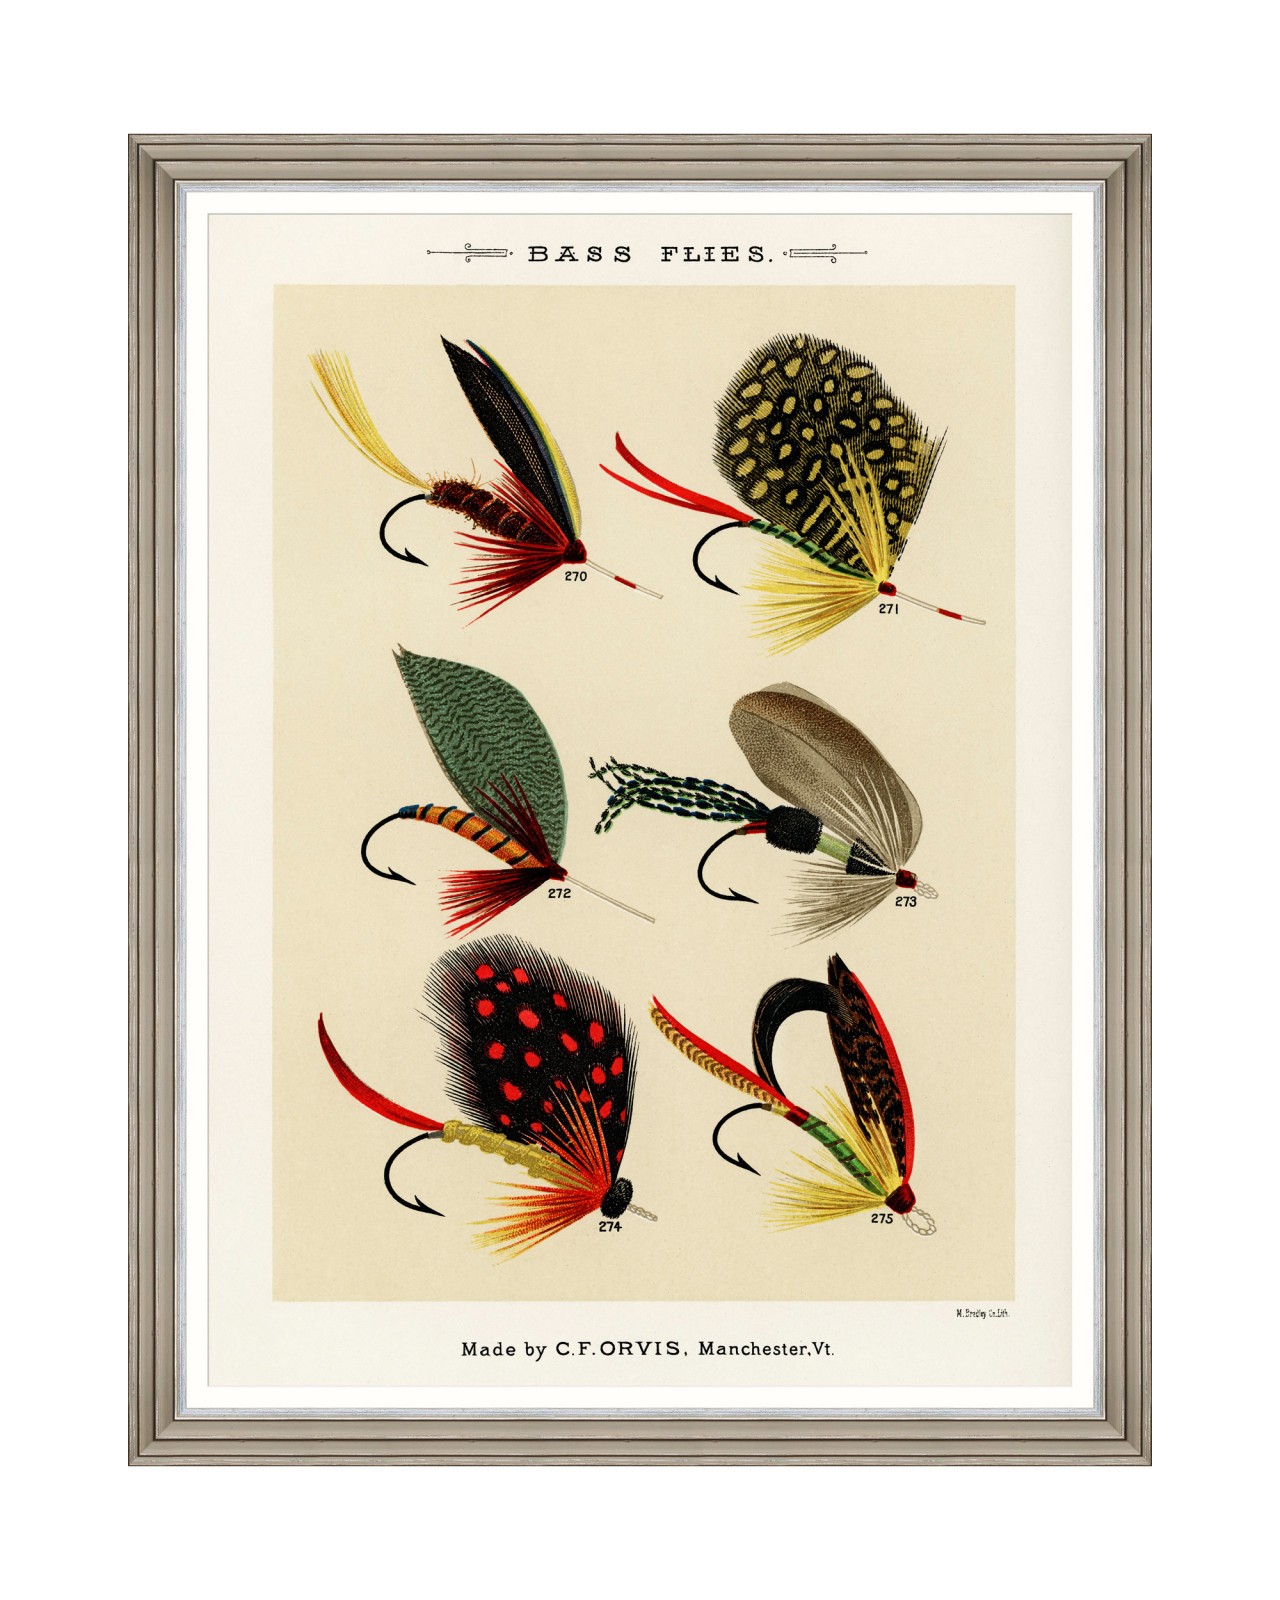 images/productimages/small/fishing-flies-ii-by-mary-orvis-marbury-framed-art-60x80cm-fa13328.jpg